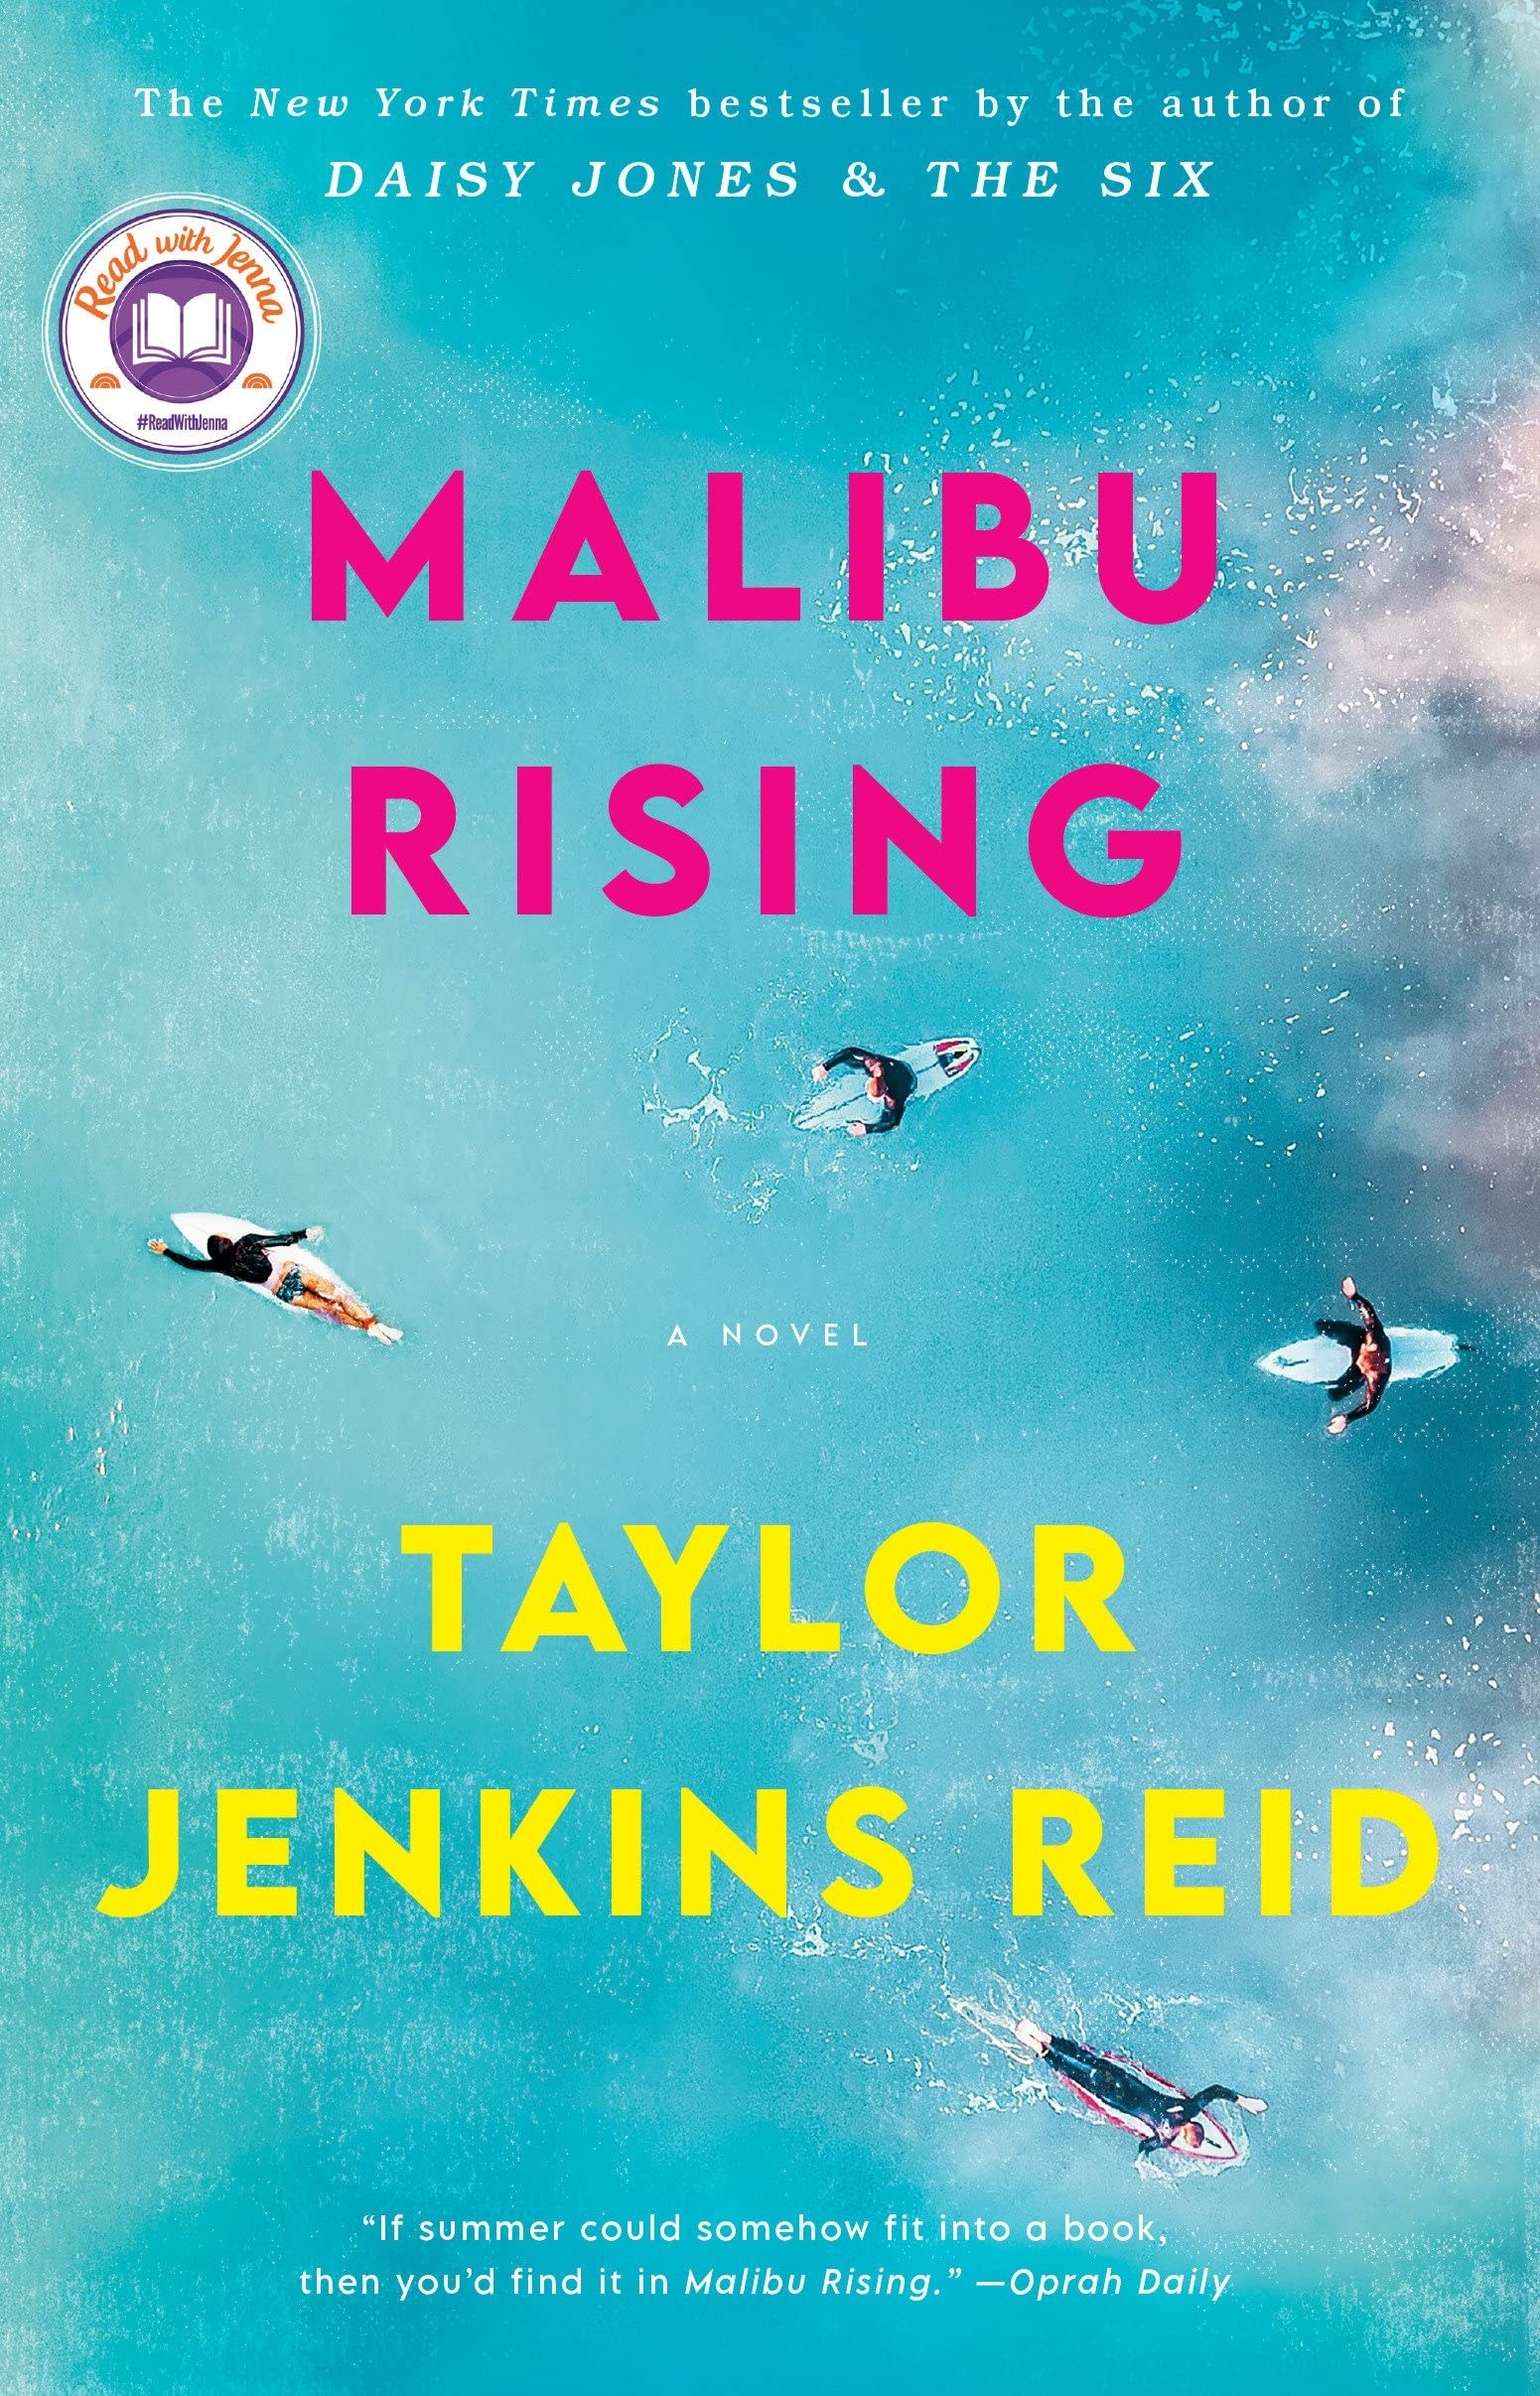 The cover of &quot;Malibu Rising&quot; by Taylor Jenkins Reid.